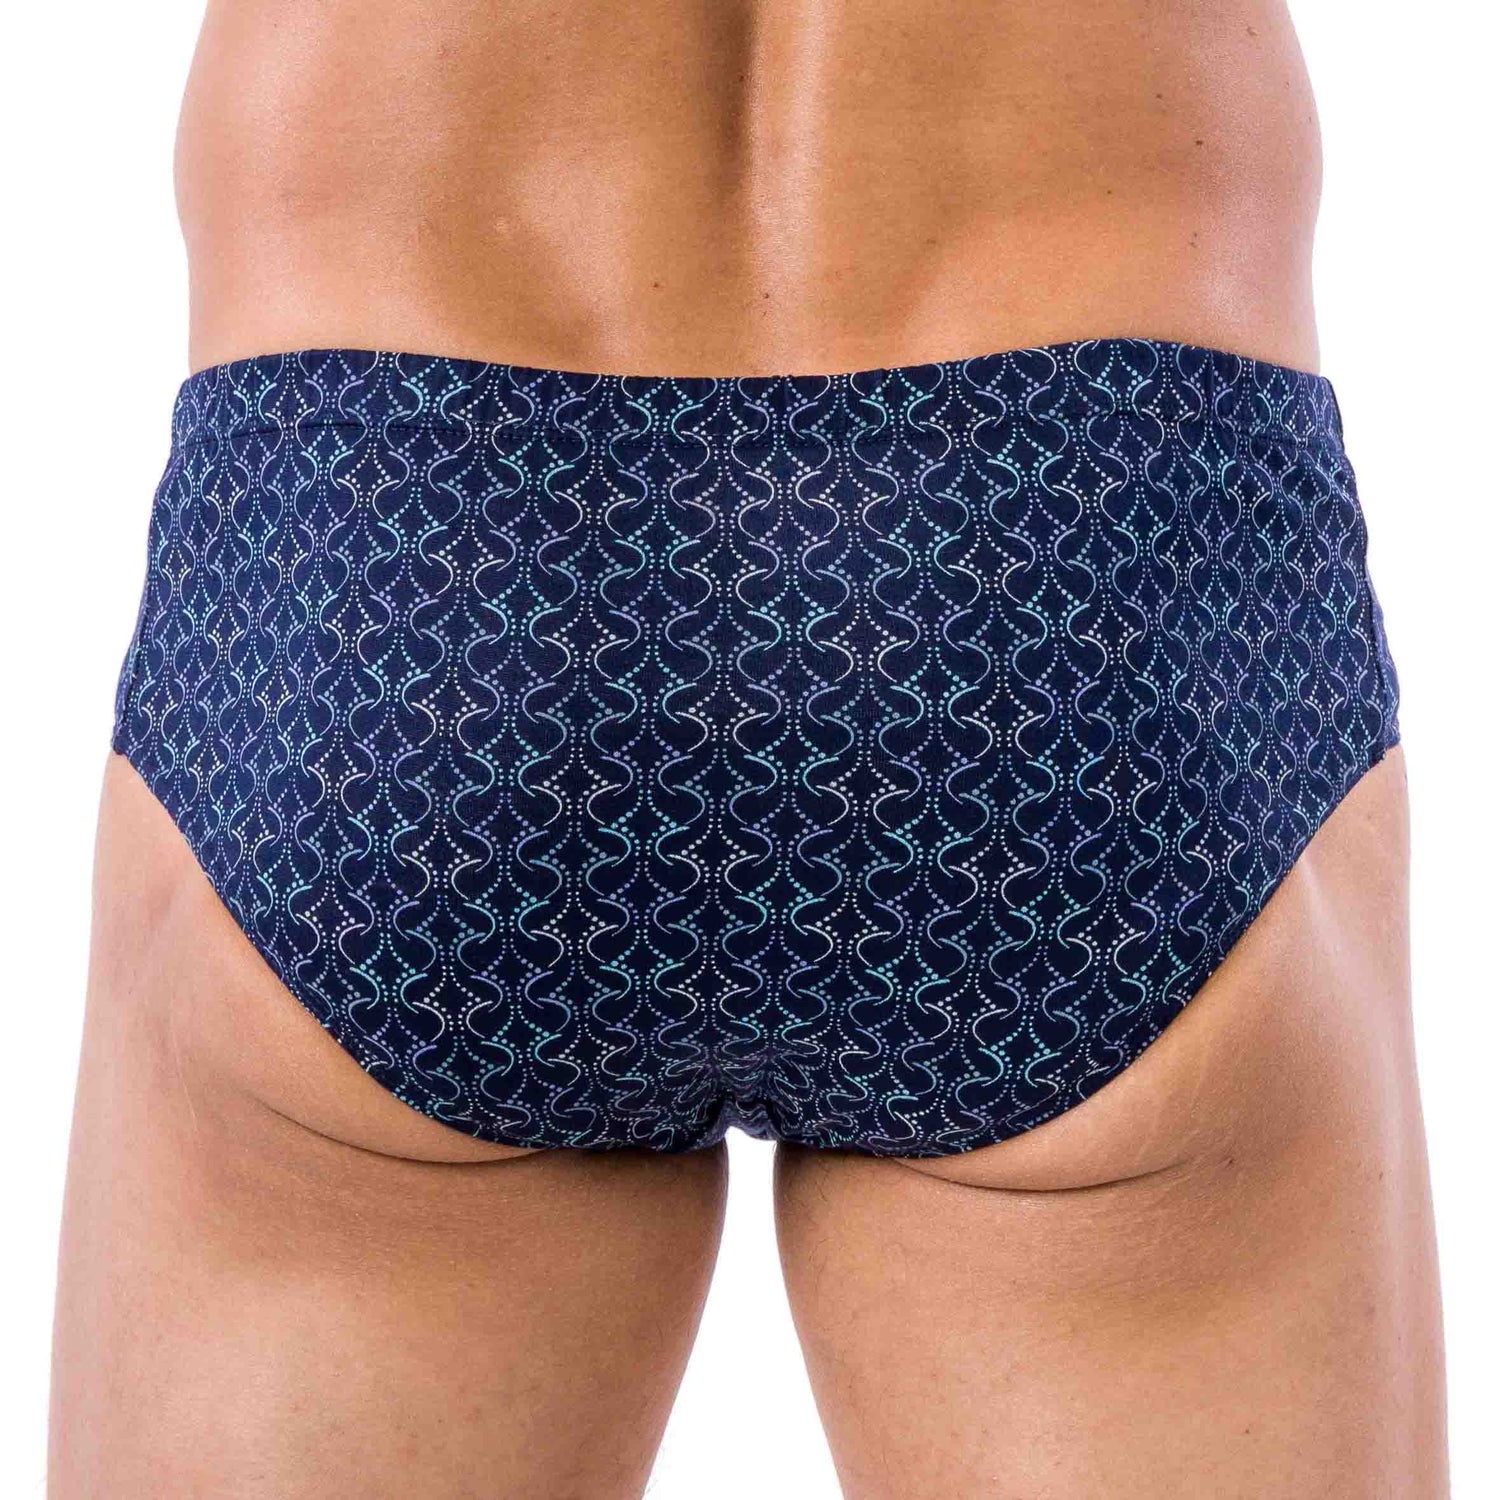 Pack of 2 HIGH Waist Briefs in Mercerized Cotton Jersey with RETRO NAVY and BLUE Print